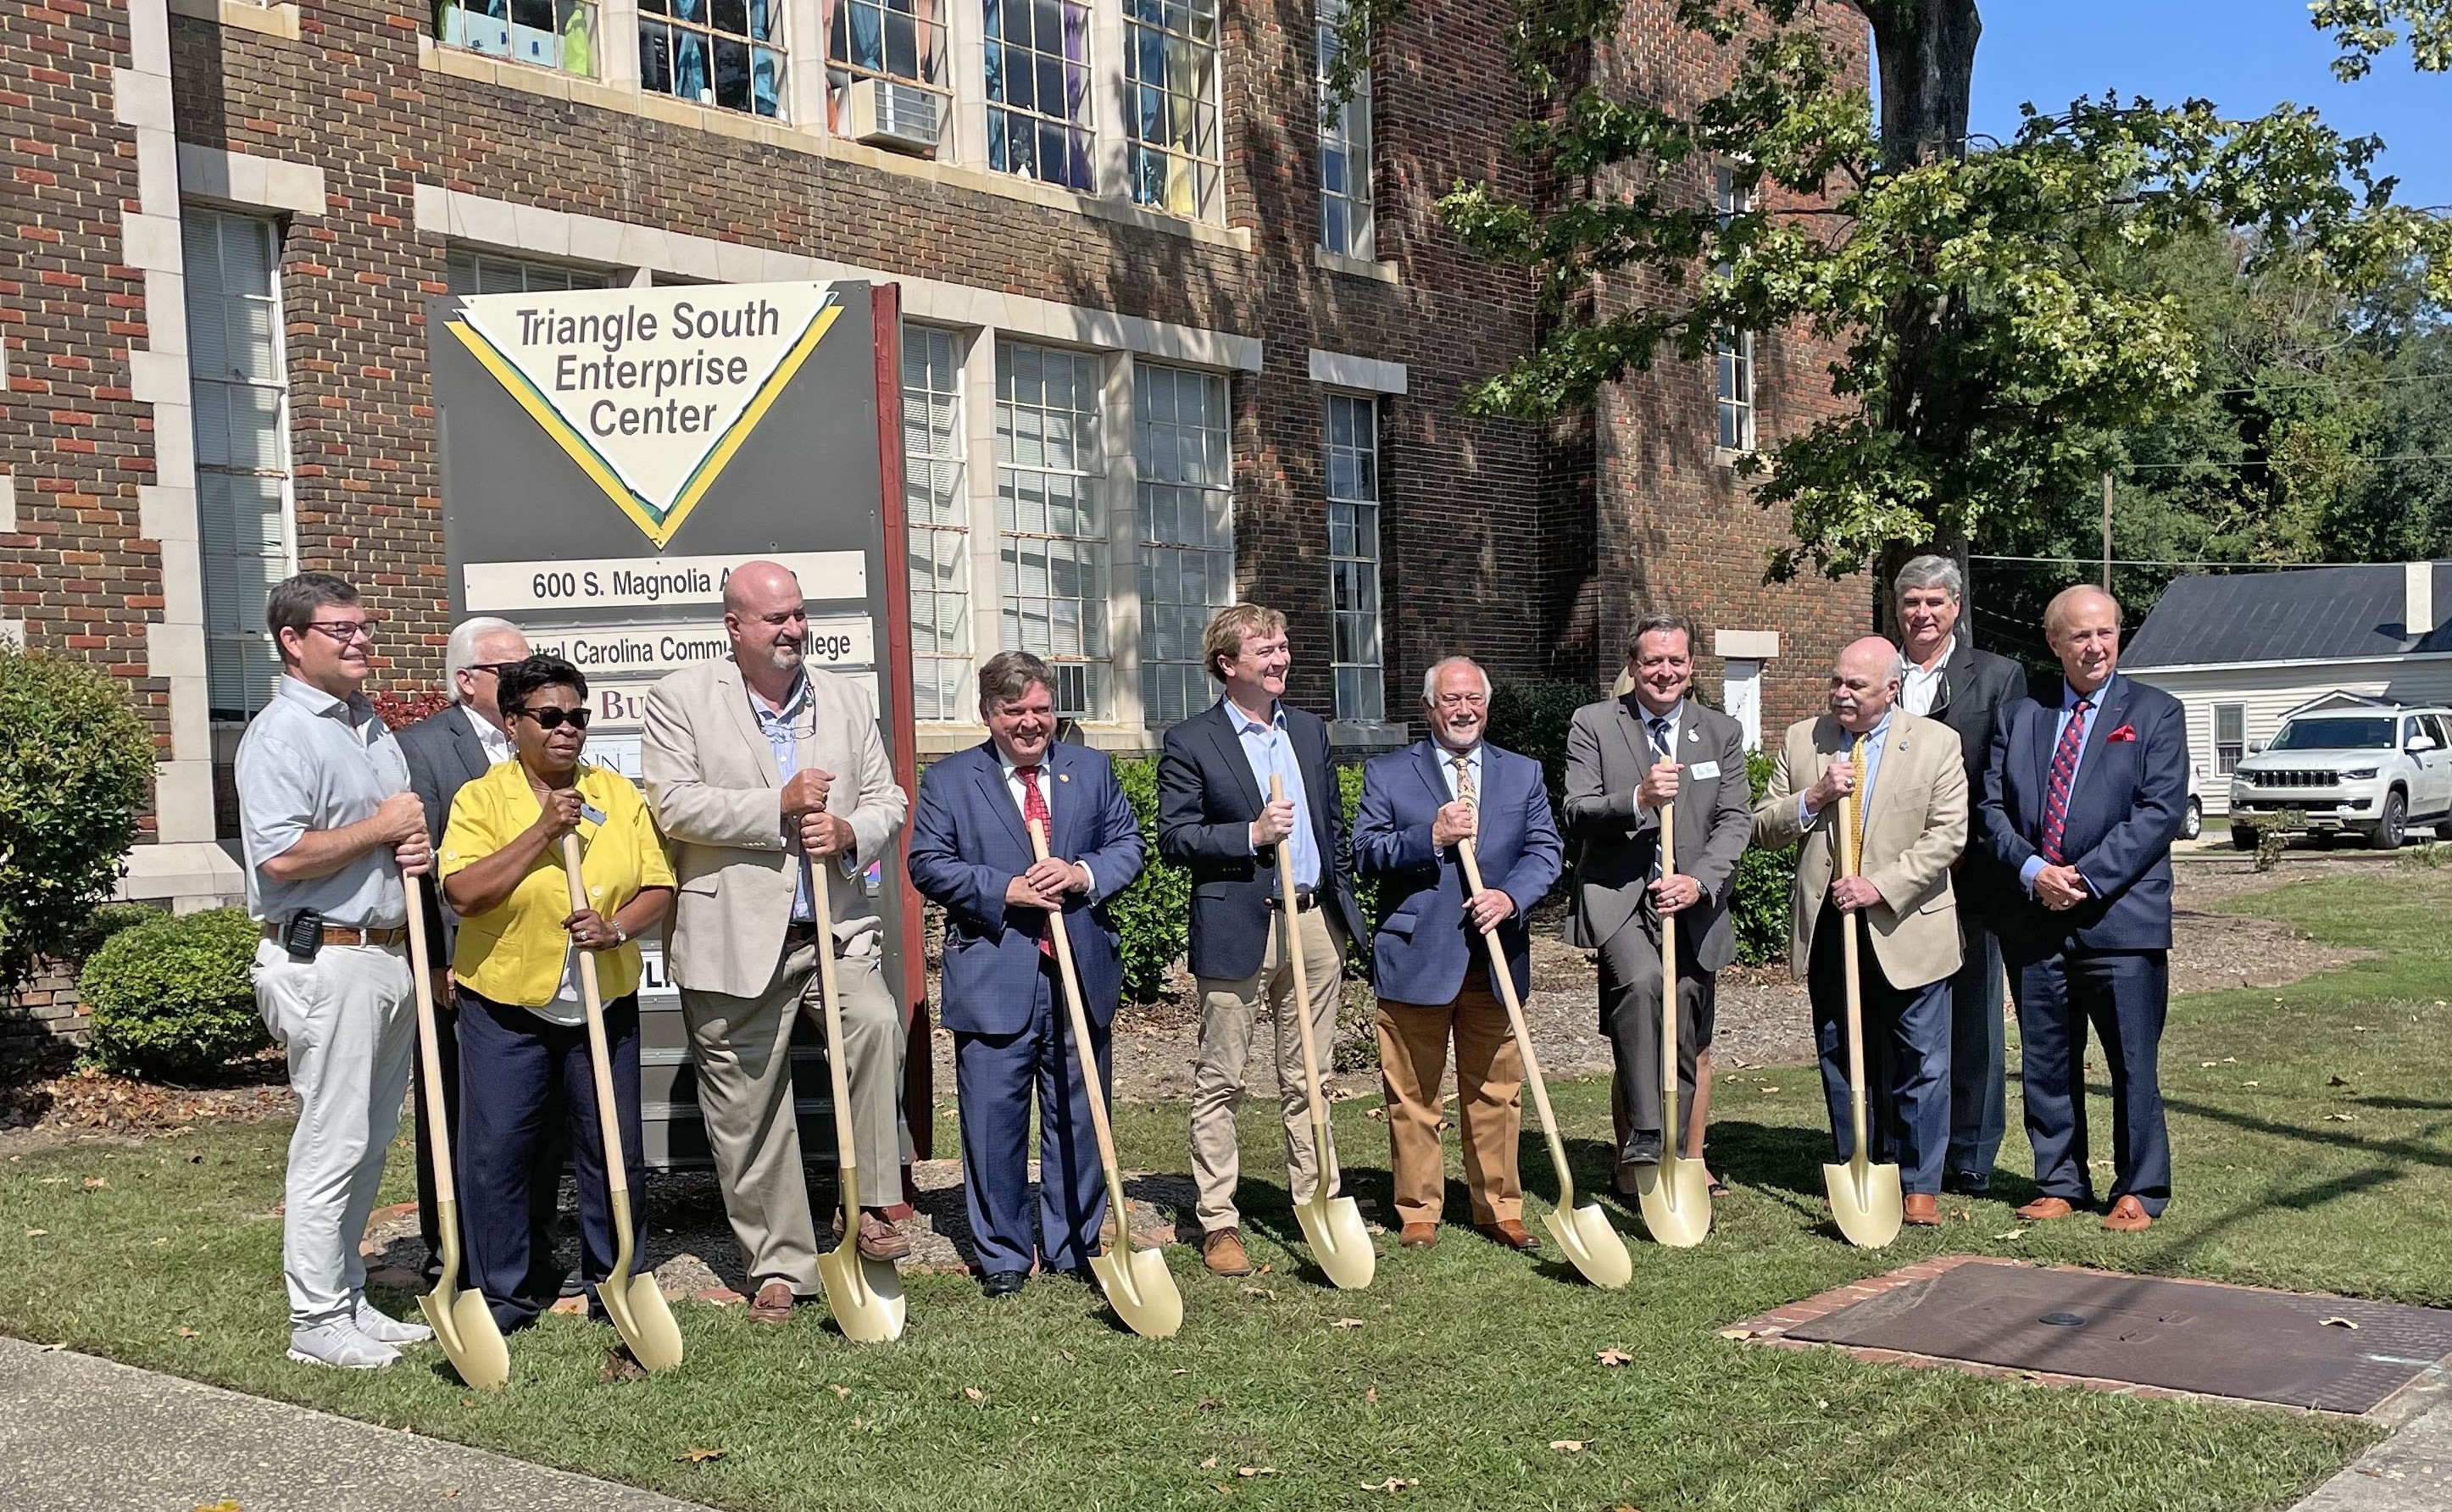 Group image at groundbreaking